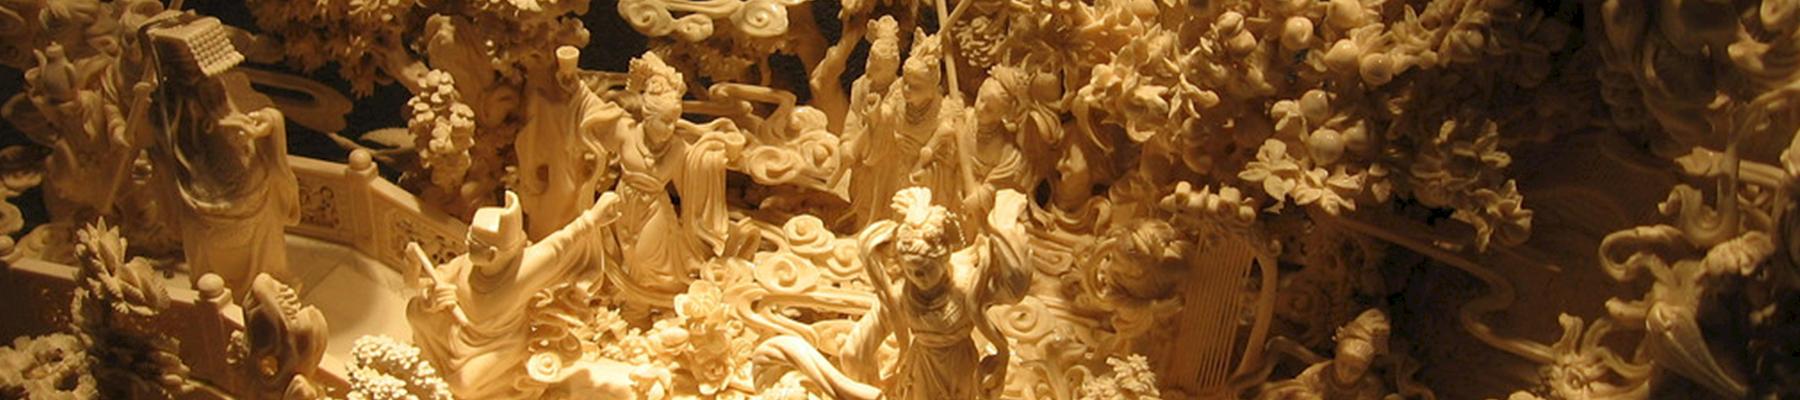 Ivory products for sale in China © Vince42 / Generic CC 2.0